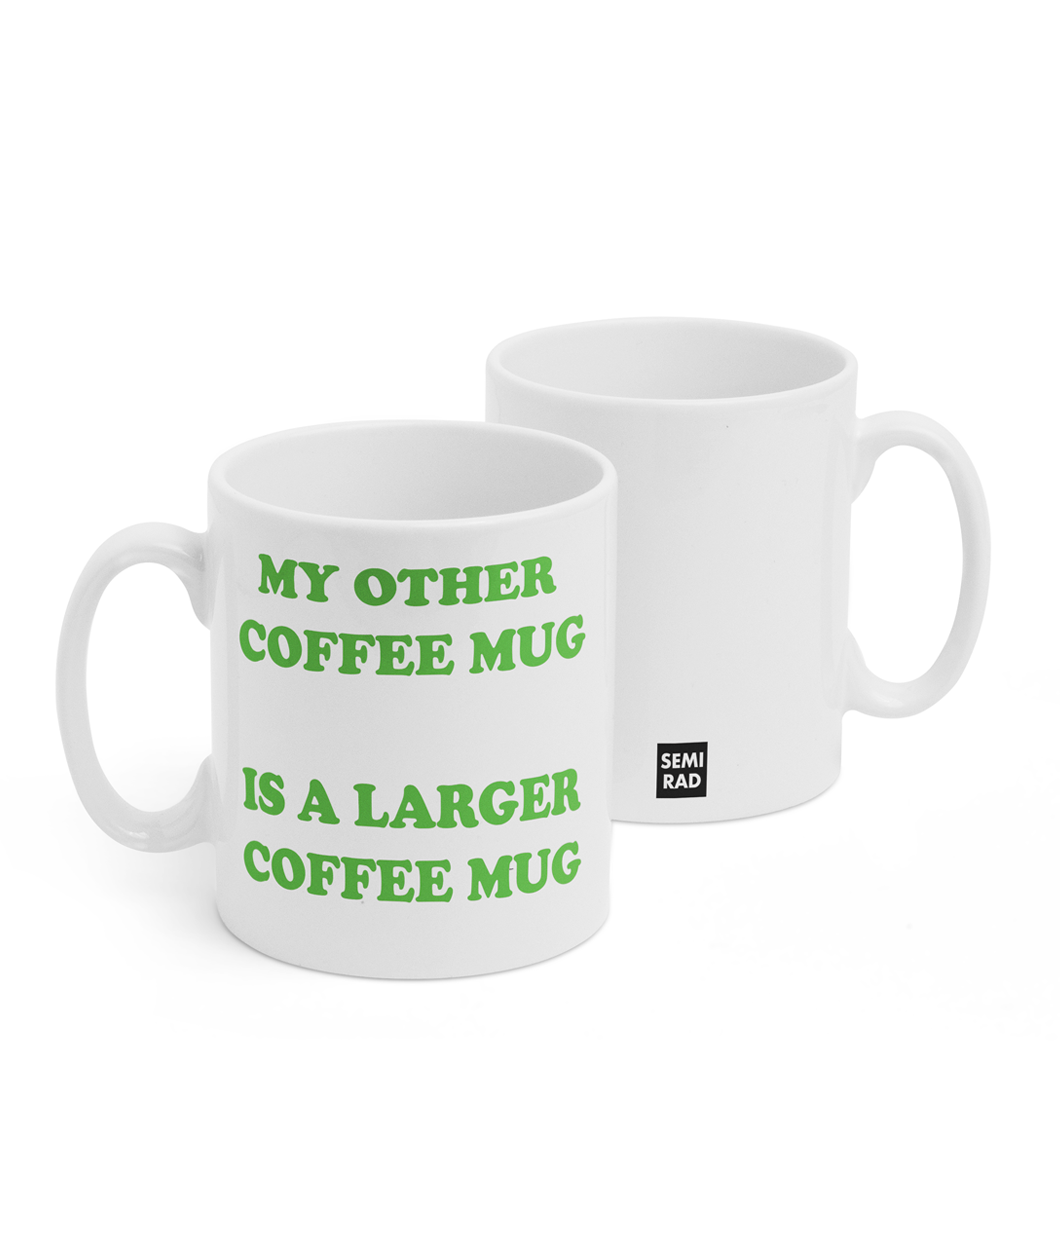 Two white mugs sitting next to each other showing two sides of the same mug. The front side has text that reads "My other coffee mug; is a larger coffee mug" in green lettering. On the back of the mug is a small black square with the words "Semi Rad".